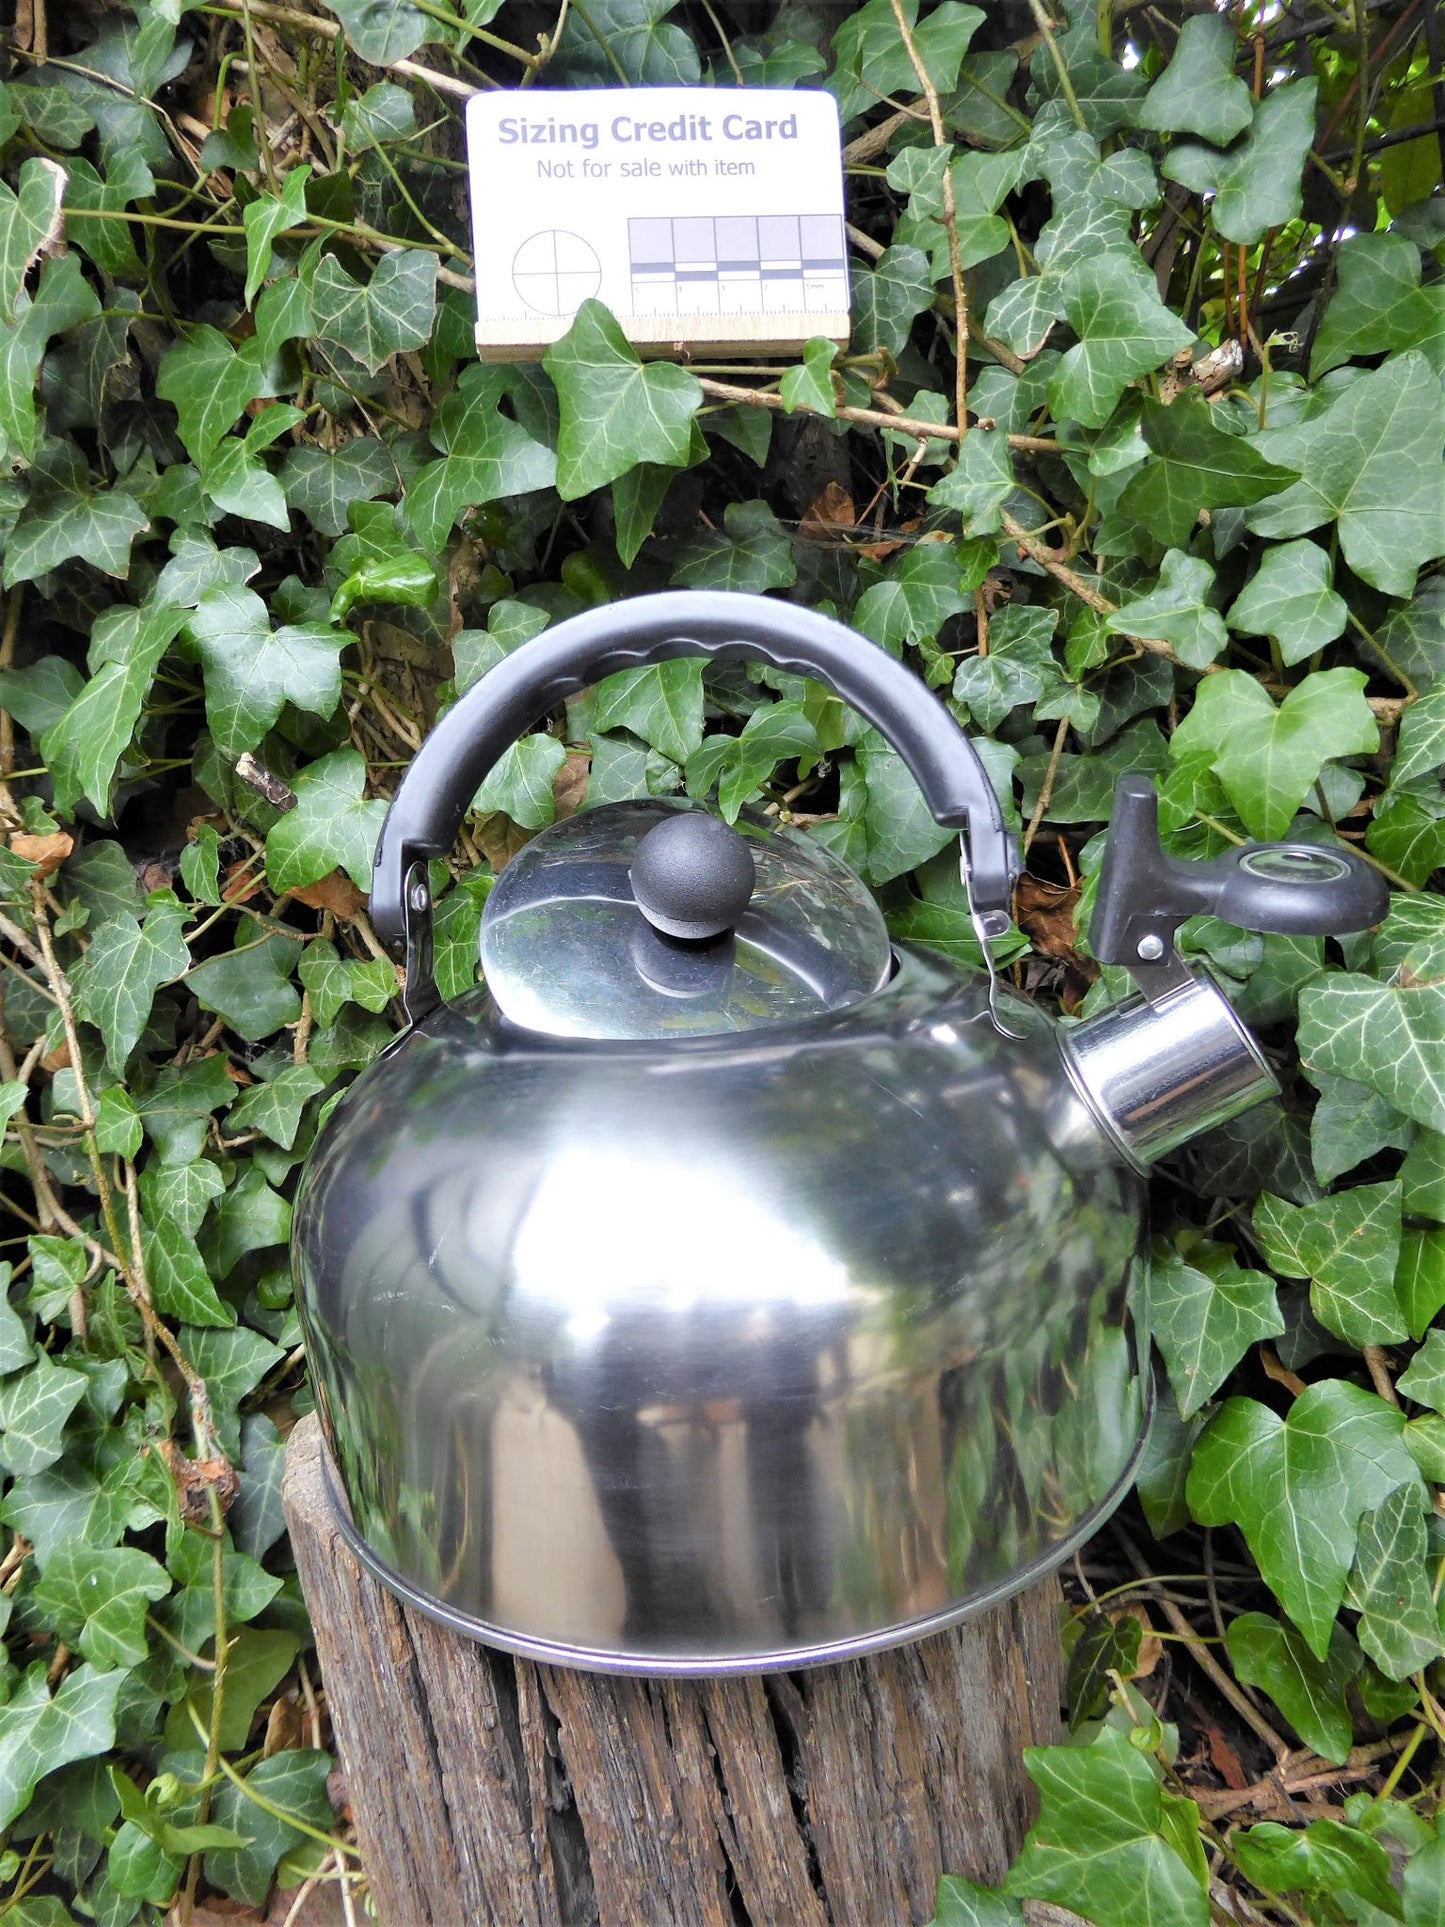 Stainless Steel 2L Whistling Kettle, lightweight and durable Kettle Huggins Attic    [Huggins attic]